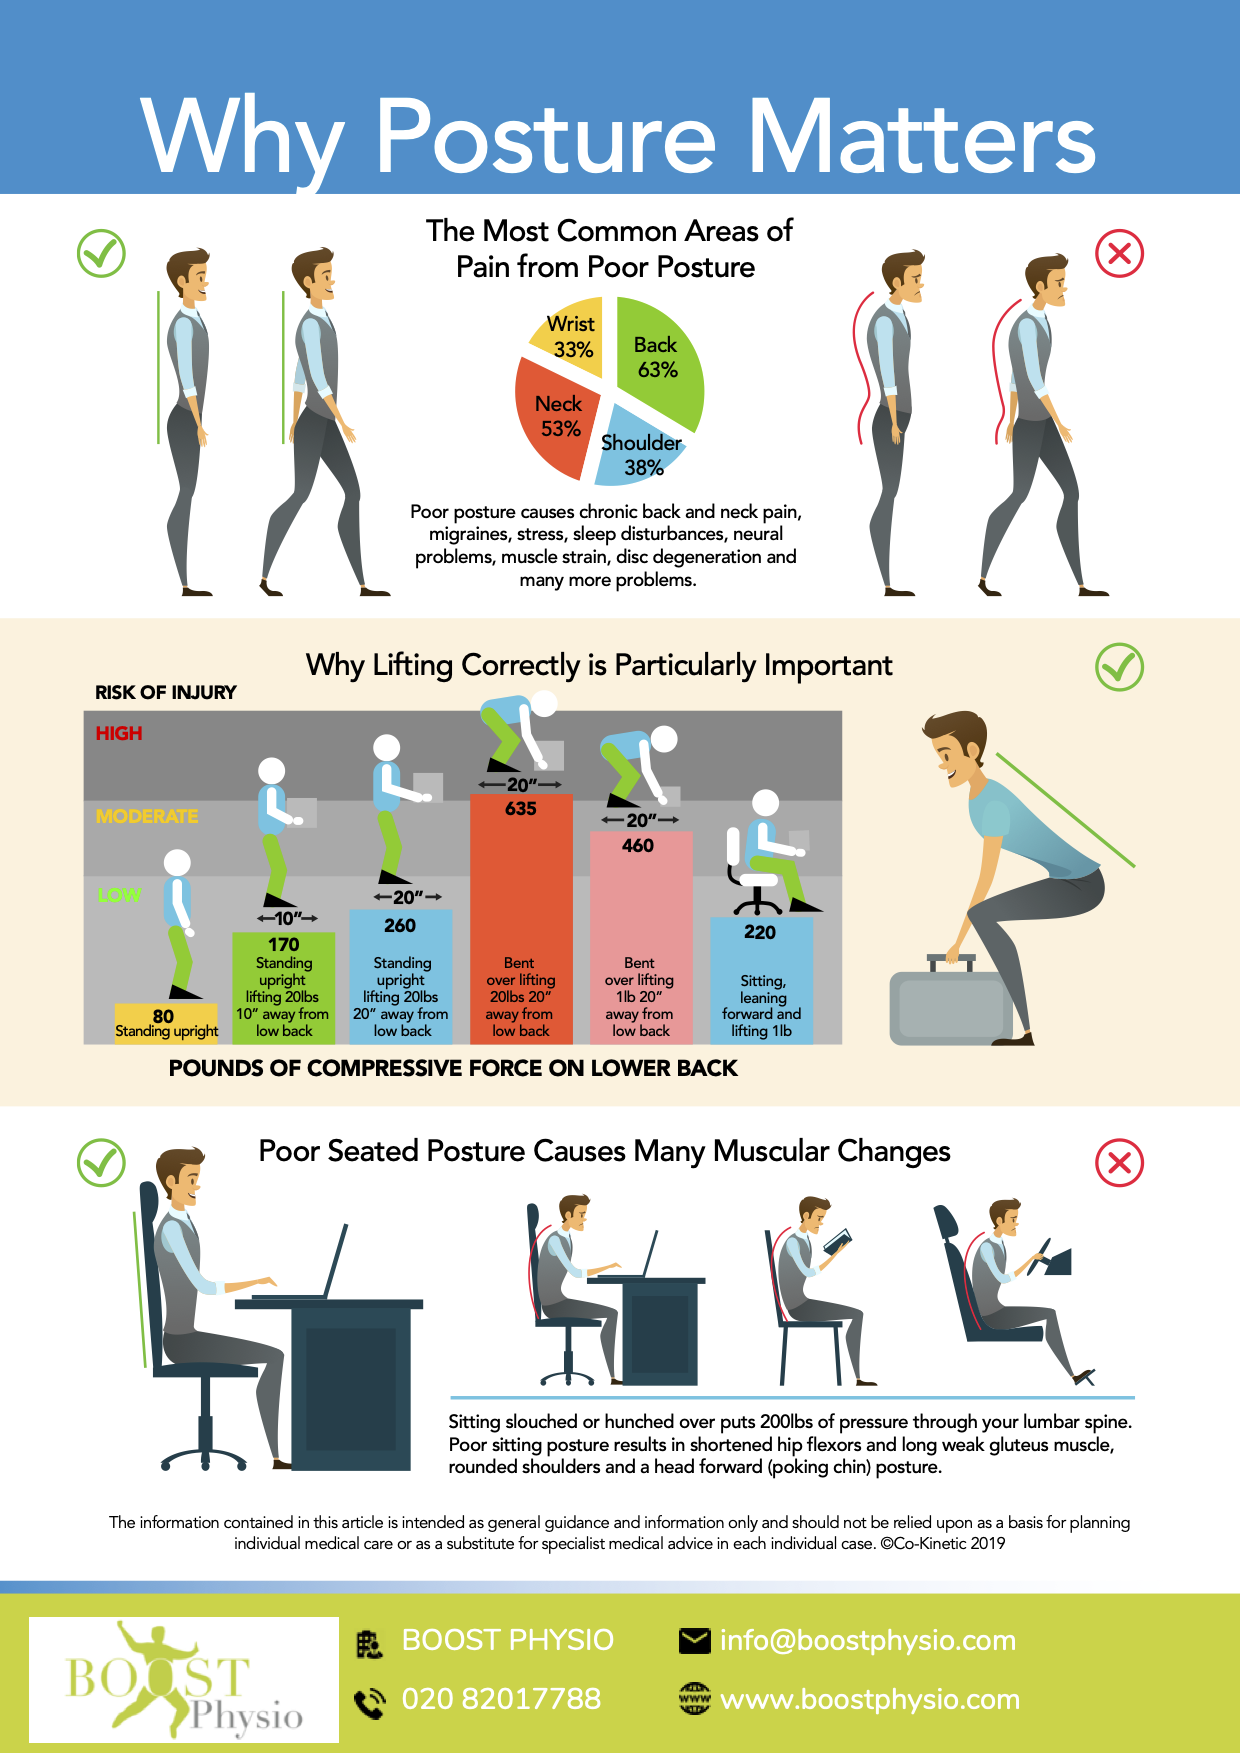 https://boostphysio.com/wp-content/uploads/2022/09/why-posture-matters.png